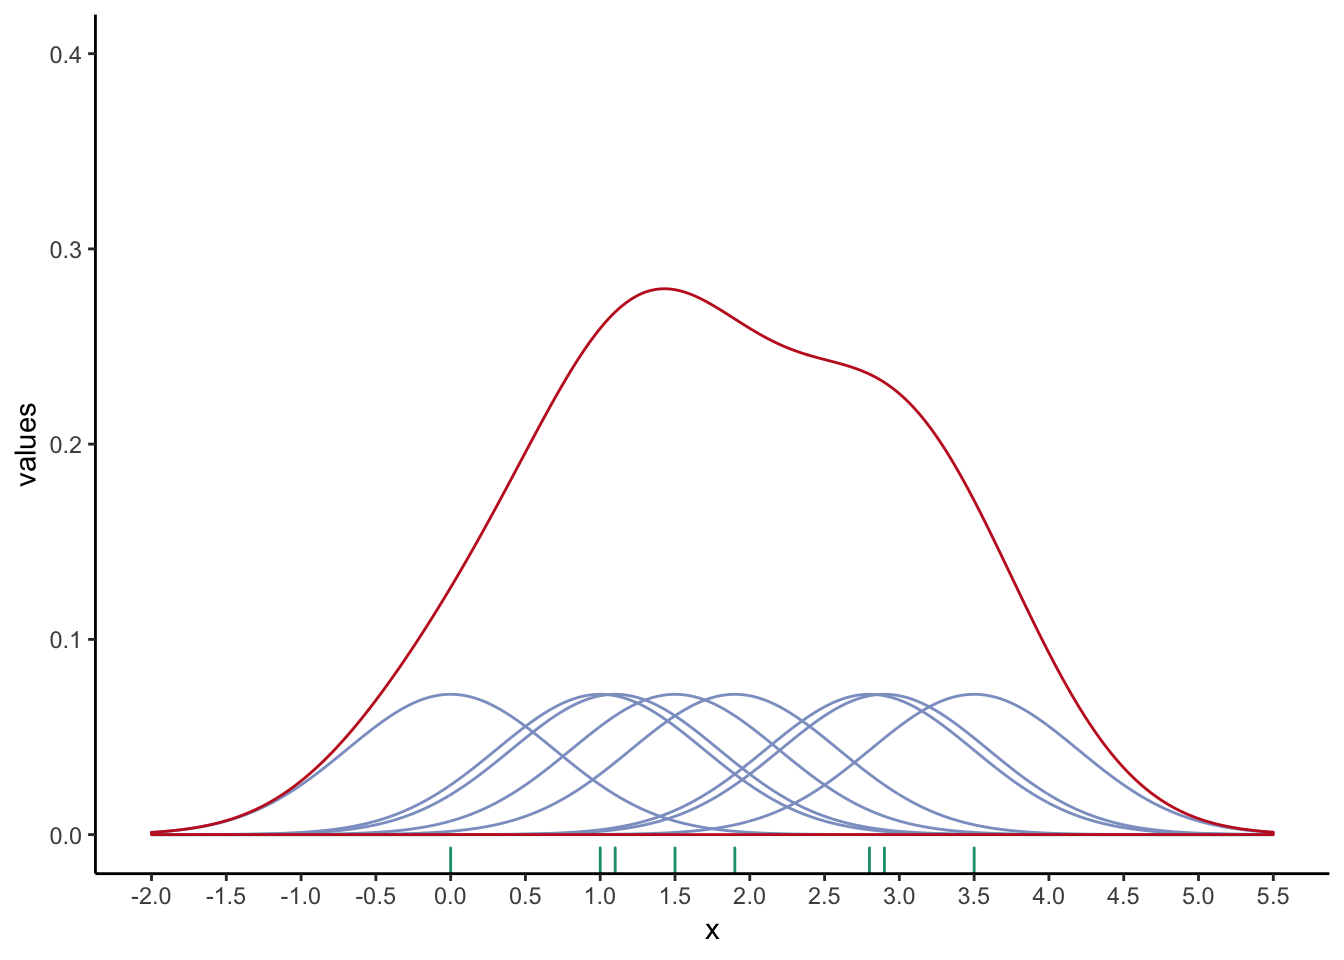 An example of how the Gaussian density function (red curve) is derived from 8 data points (green tick marks). The density of each individual data point (purple curves) reaches a maximum of 0.125 (1/8).